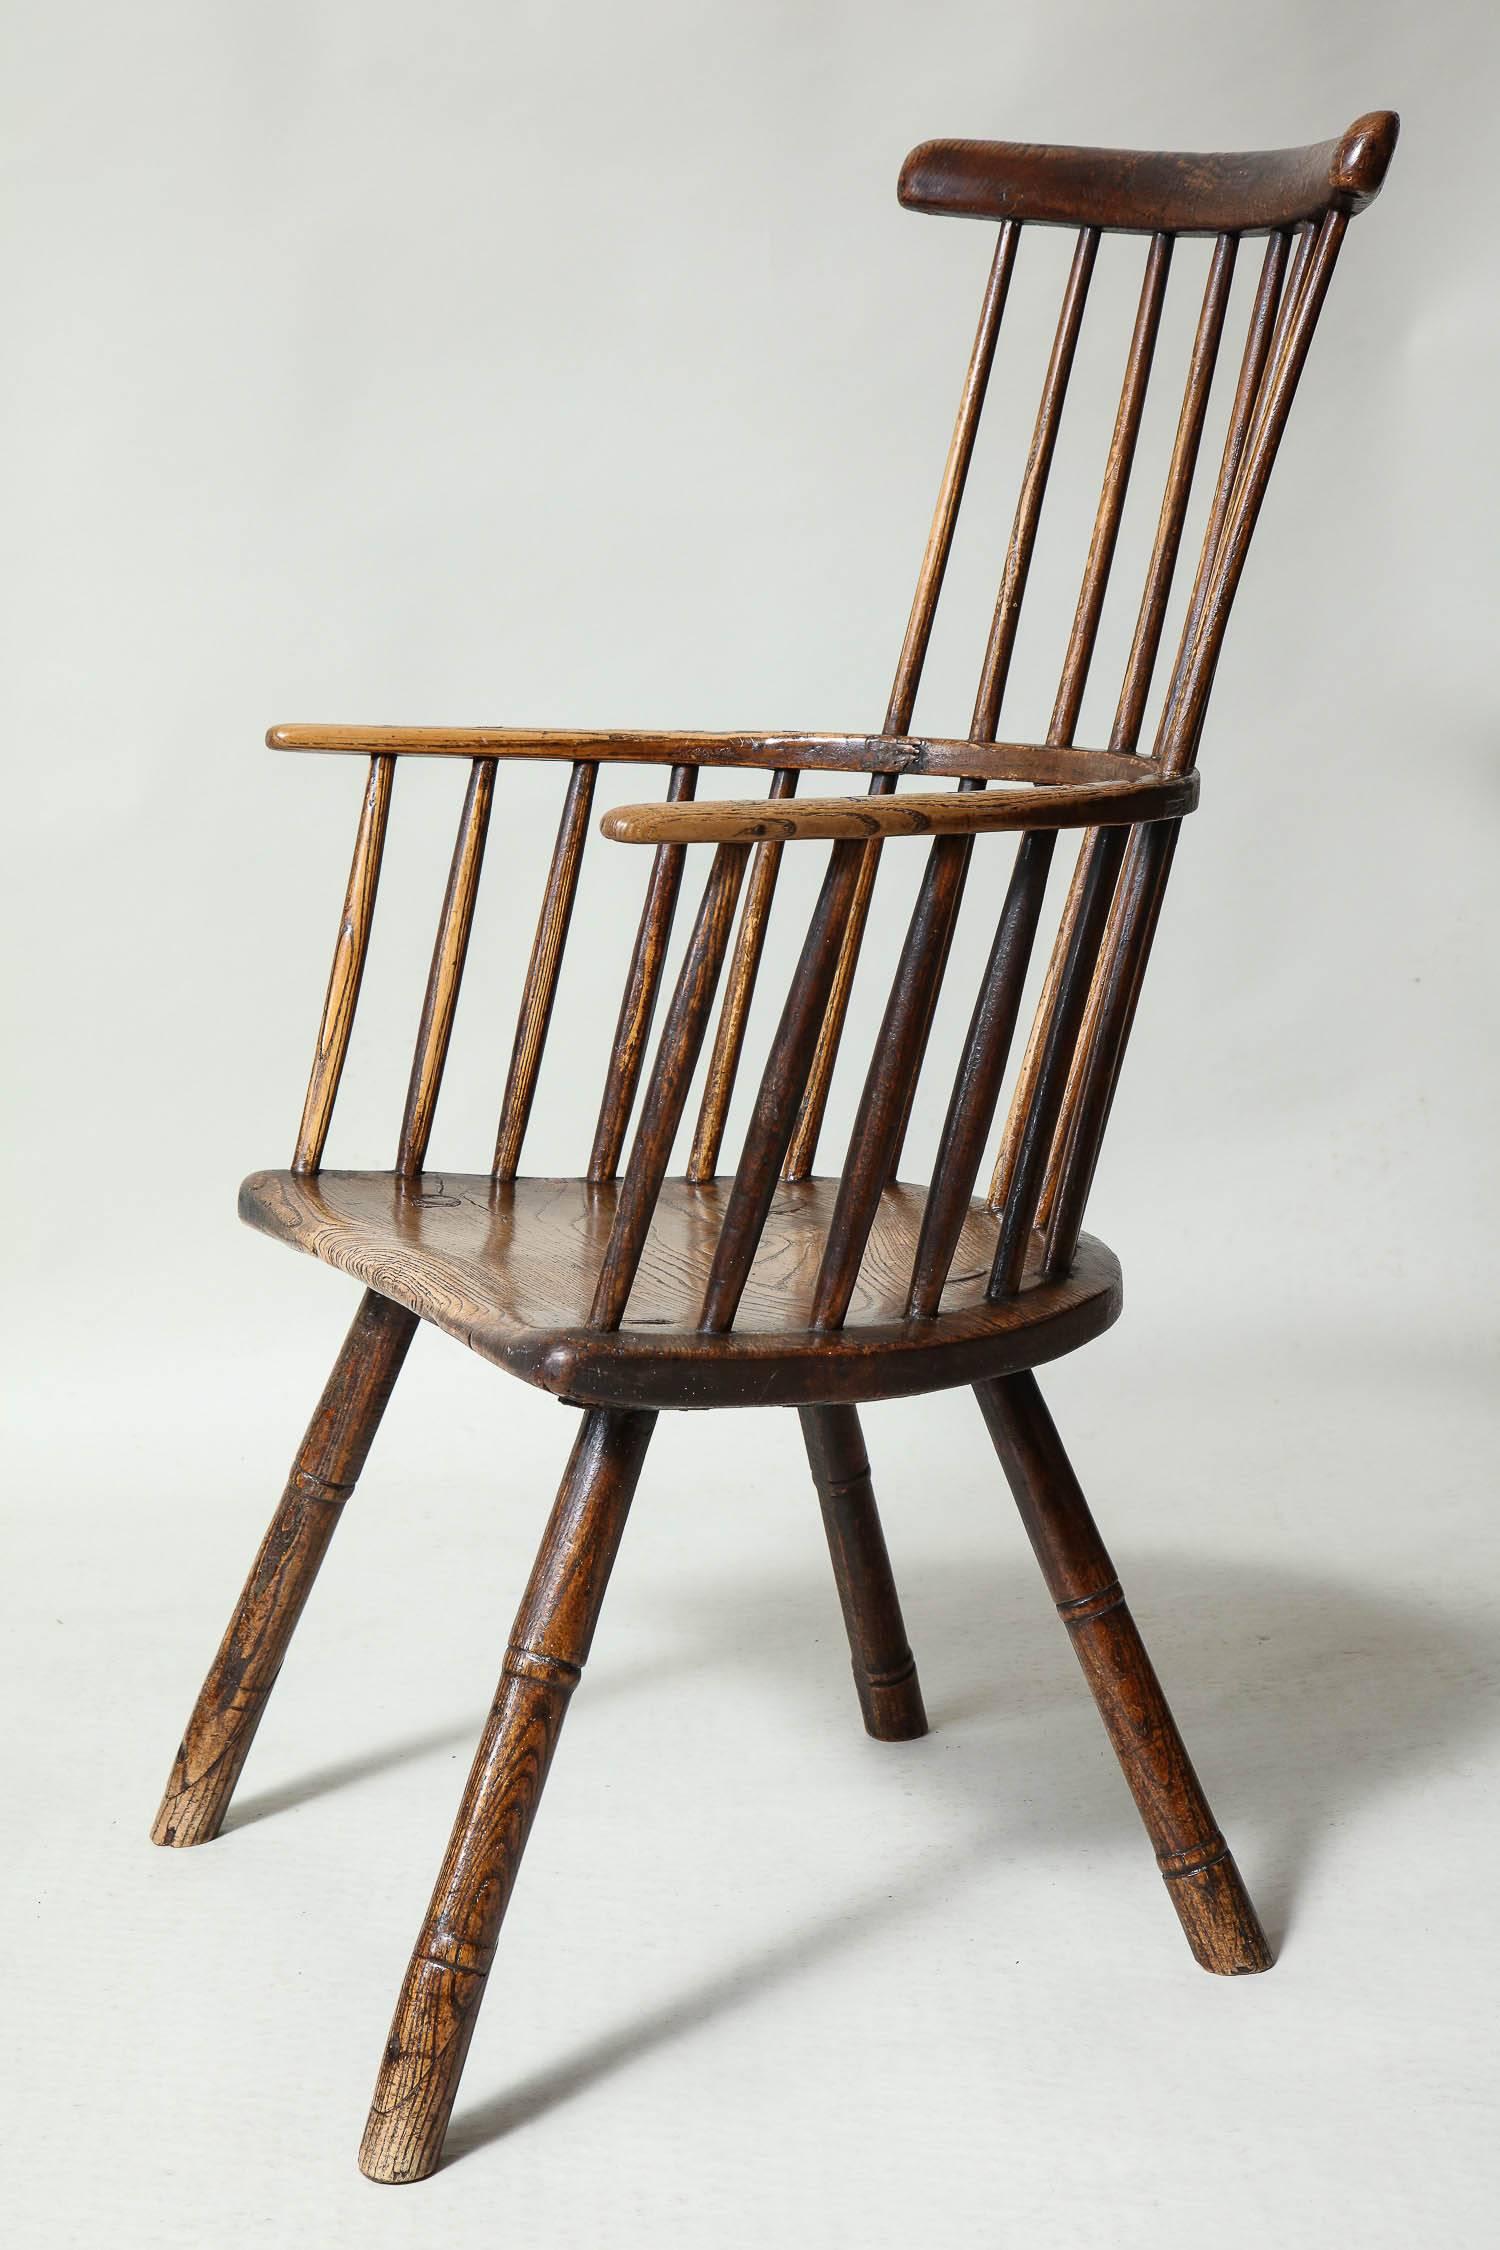 Country Rustic 18th Century English Comb Back Windsor Armchair